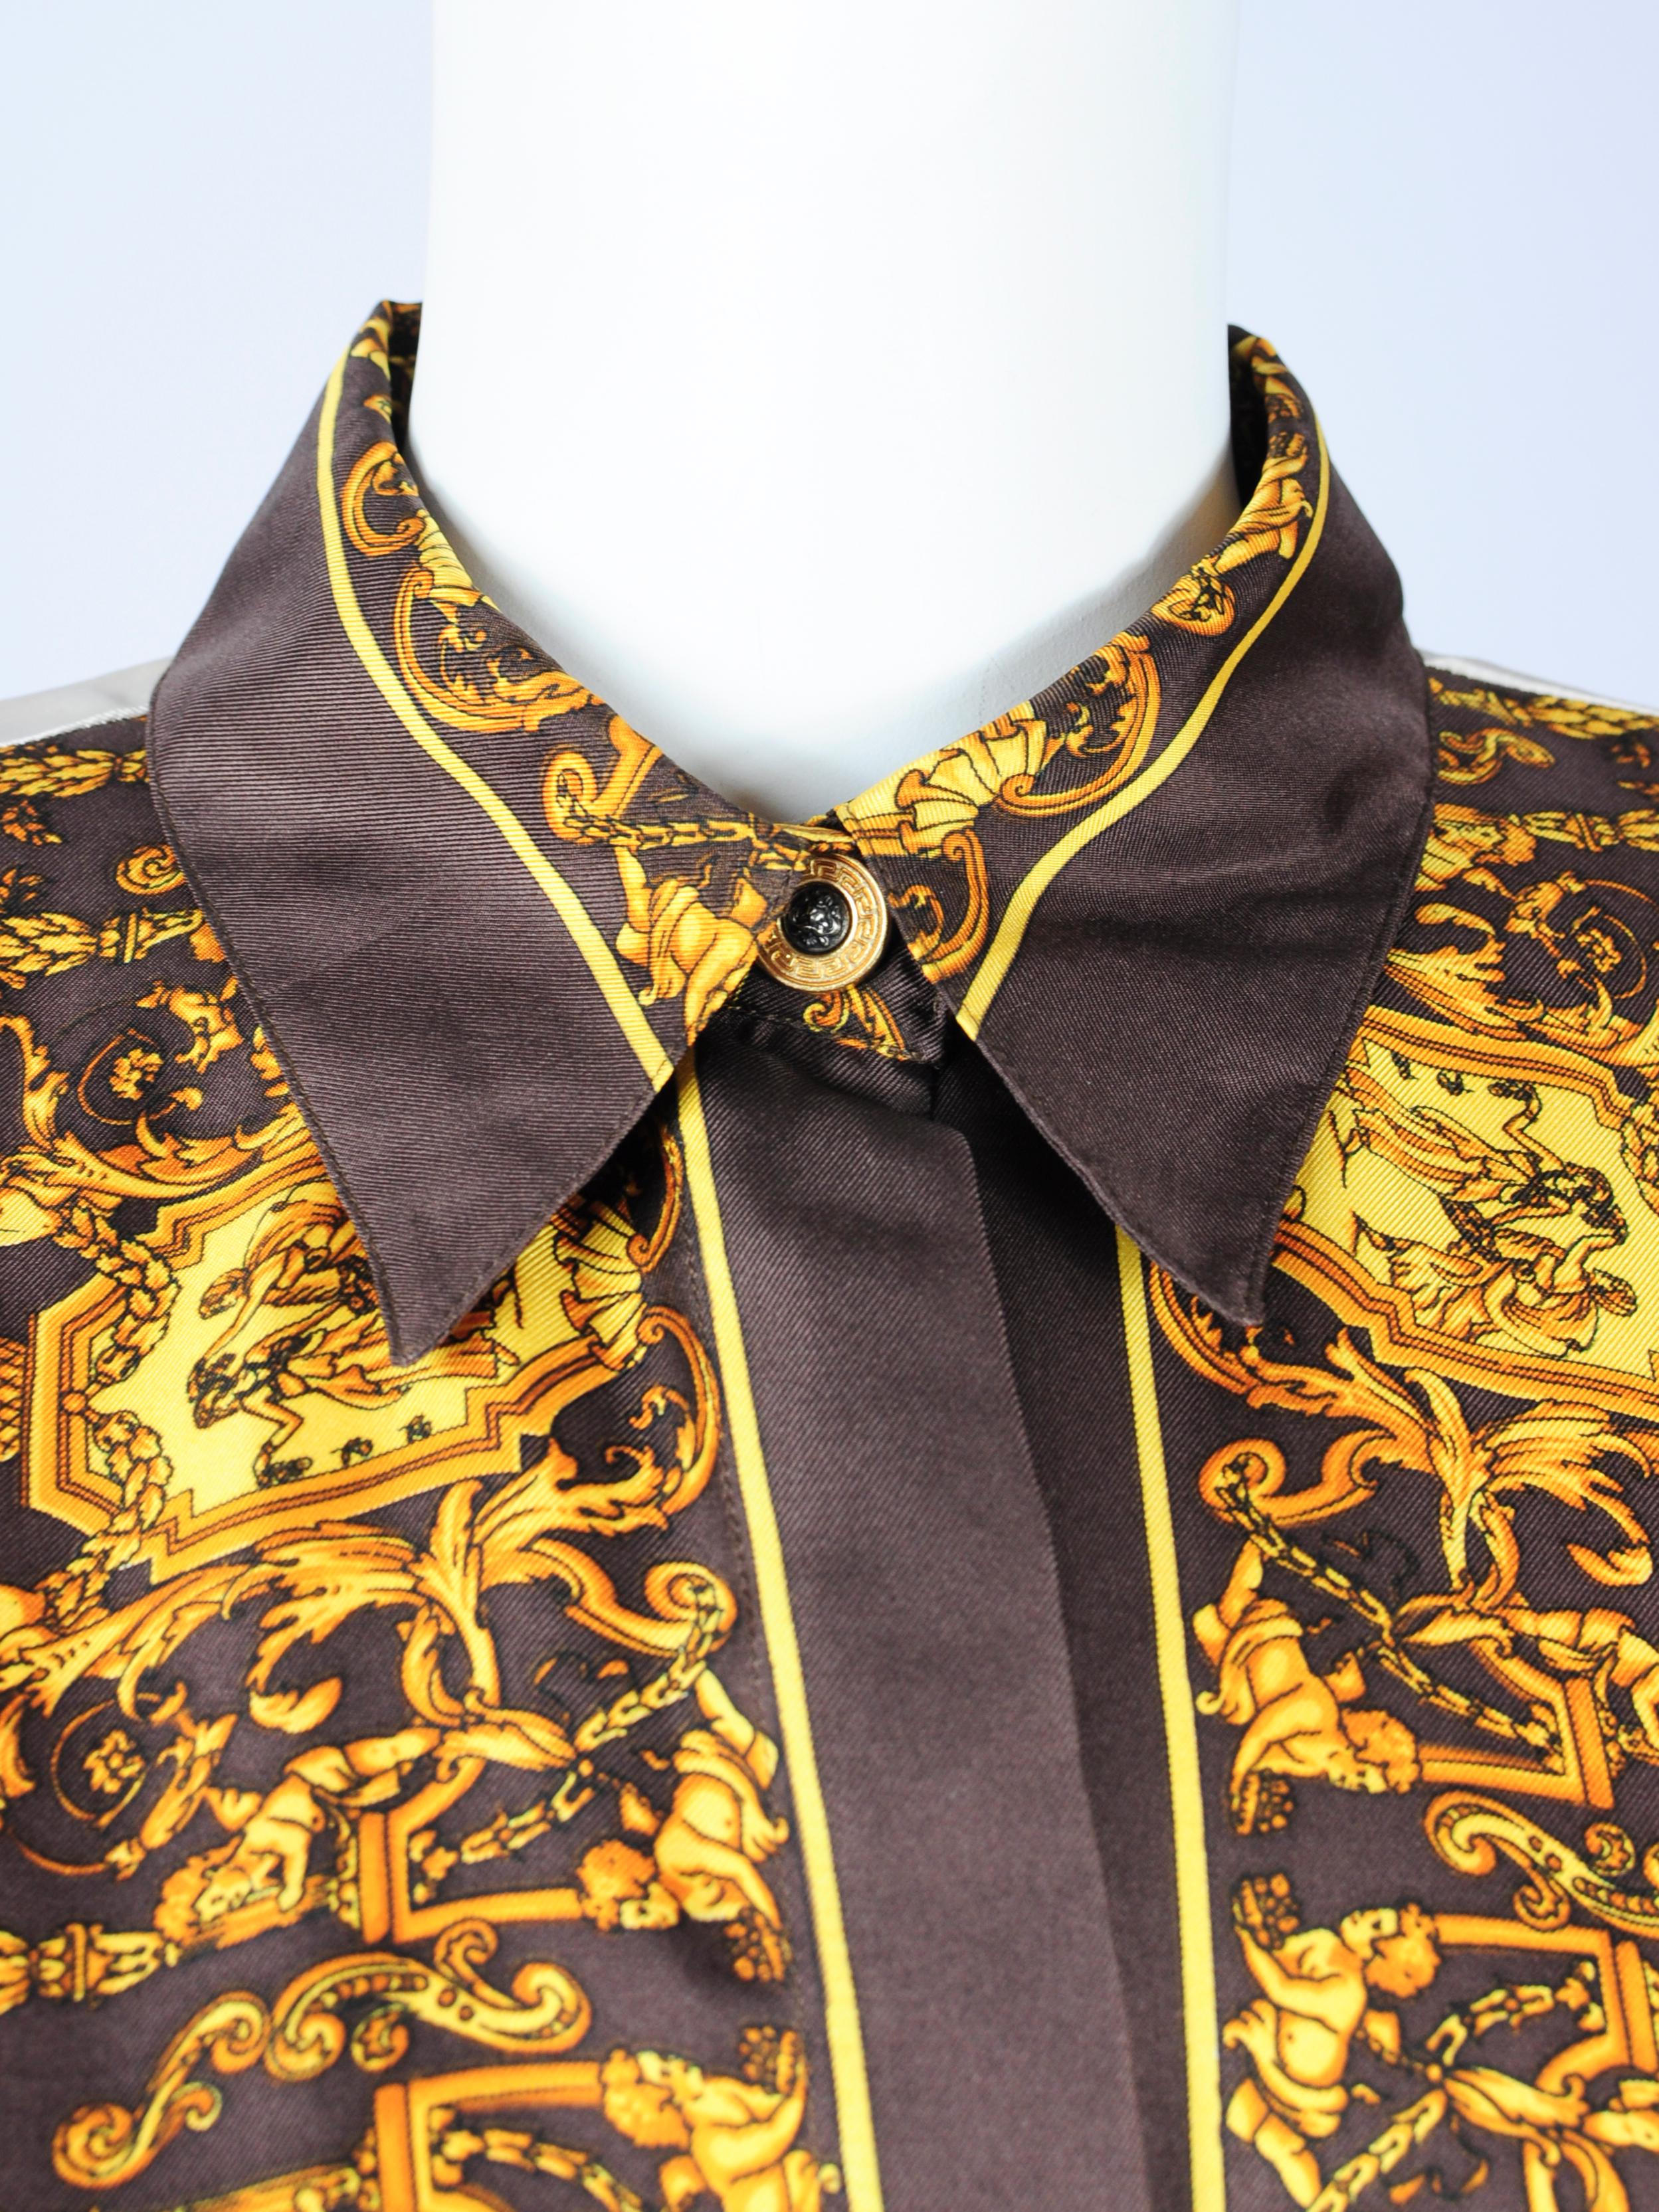 Marina Sitbon pour Kamosho Paris brown, gold and cream baroque print silk blouse from the 1990s. This Kamosho Paris silk blouse has a baroque, opulent, Versace-esque print featuring a Medusa head, Greek elements, angels and carriages. The silk is